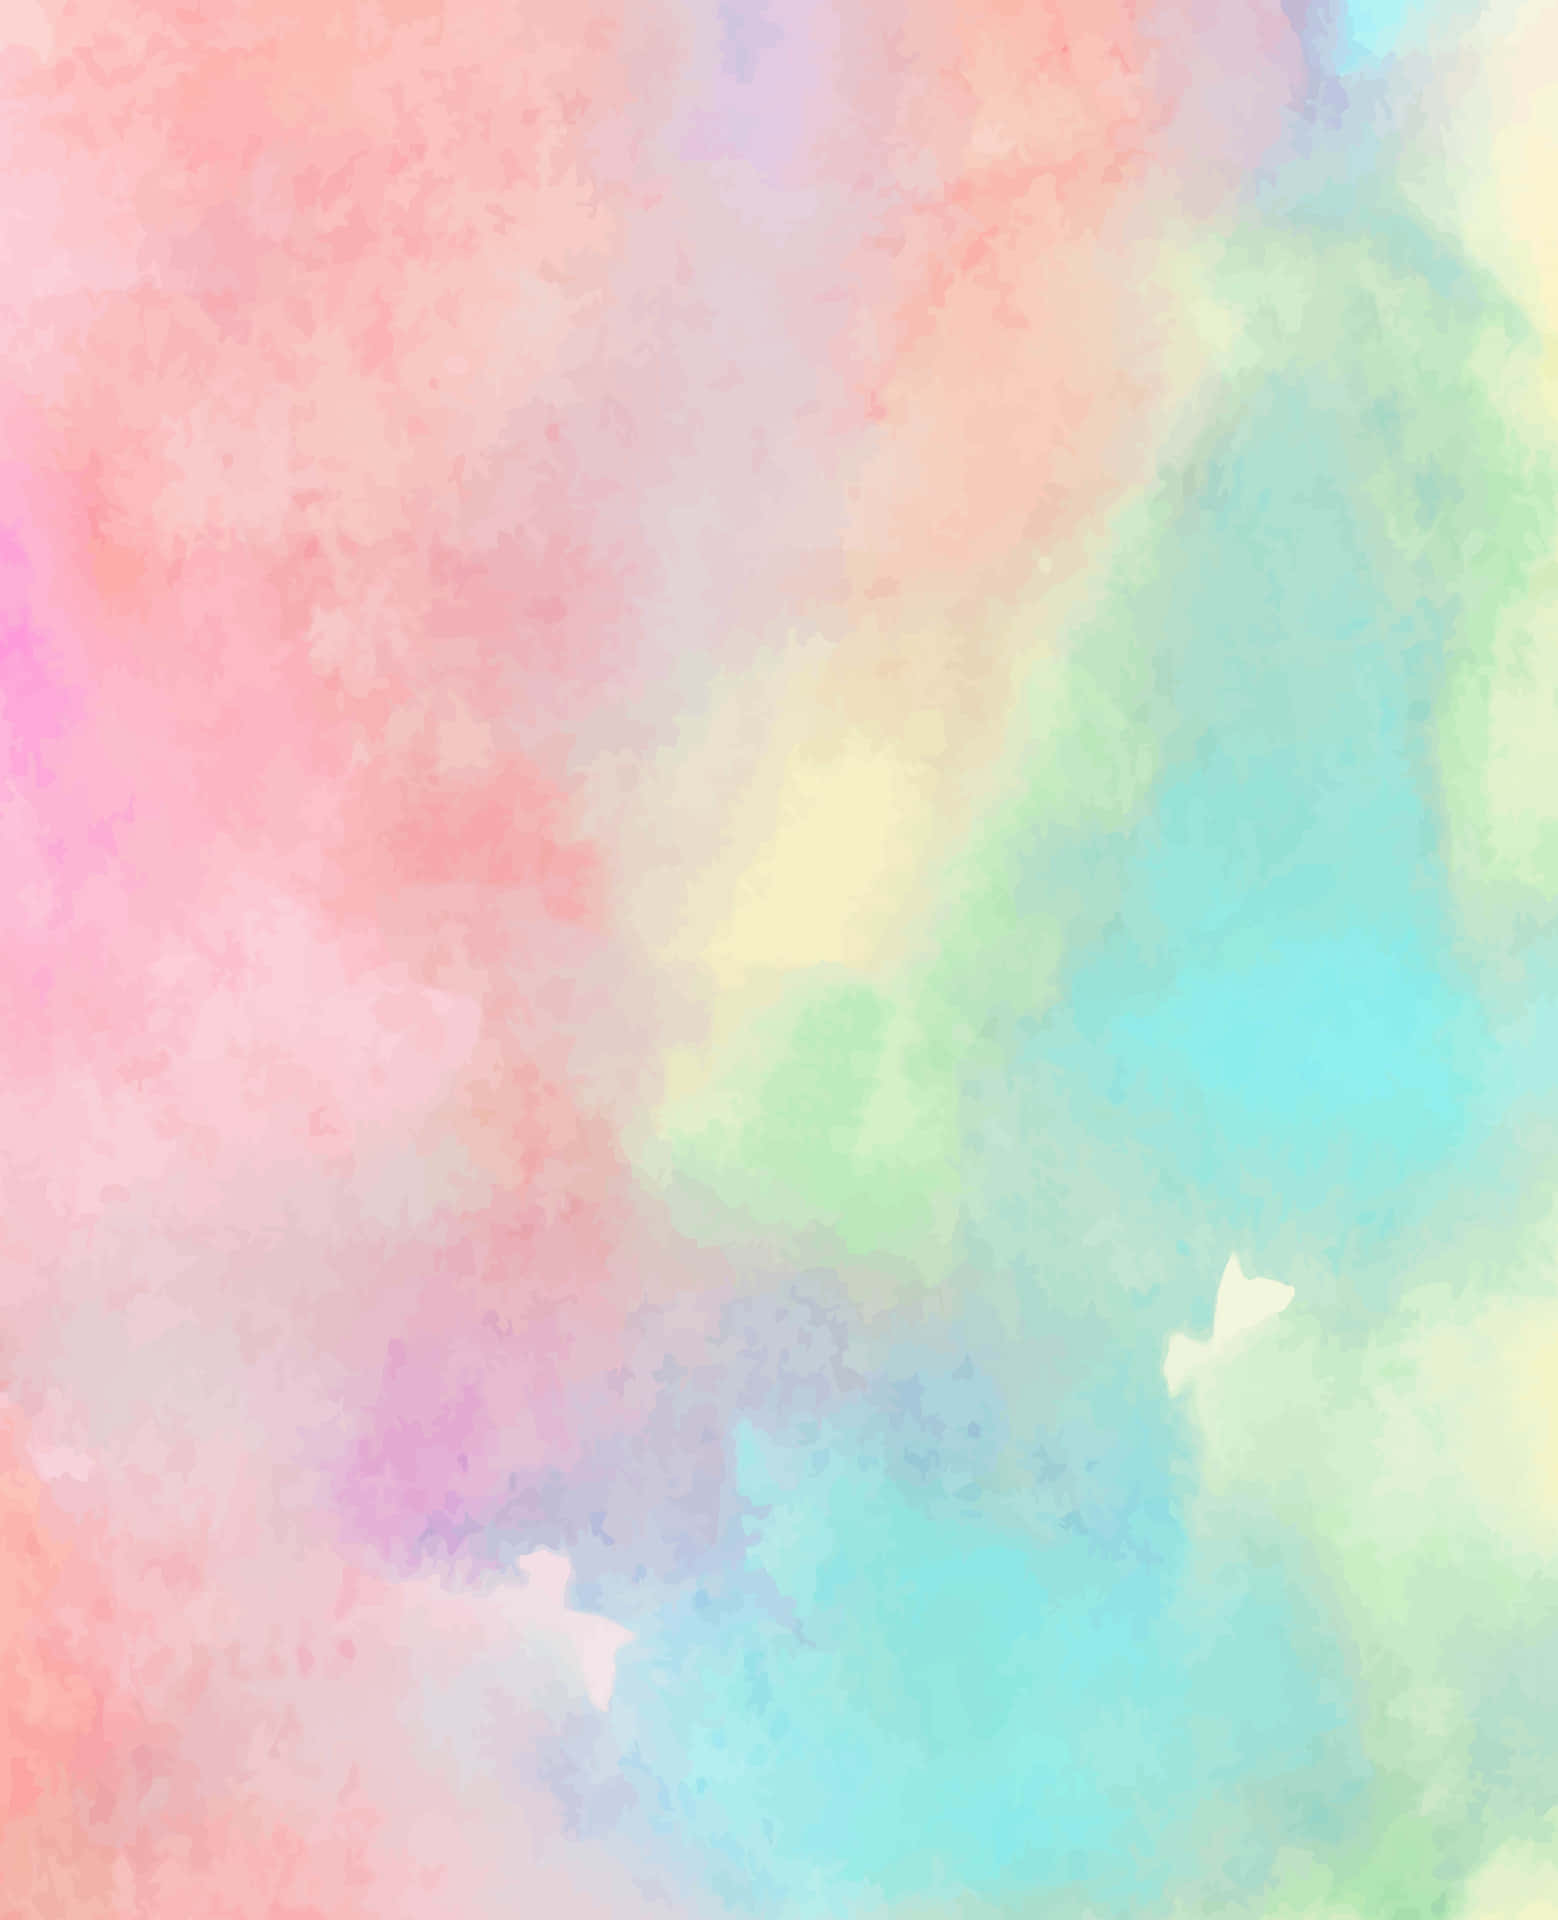 Pastel-colored phone background with soothing abstract design